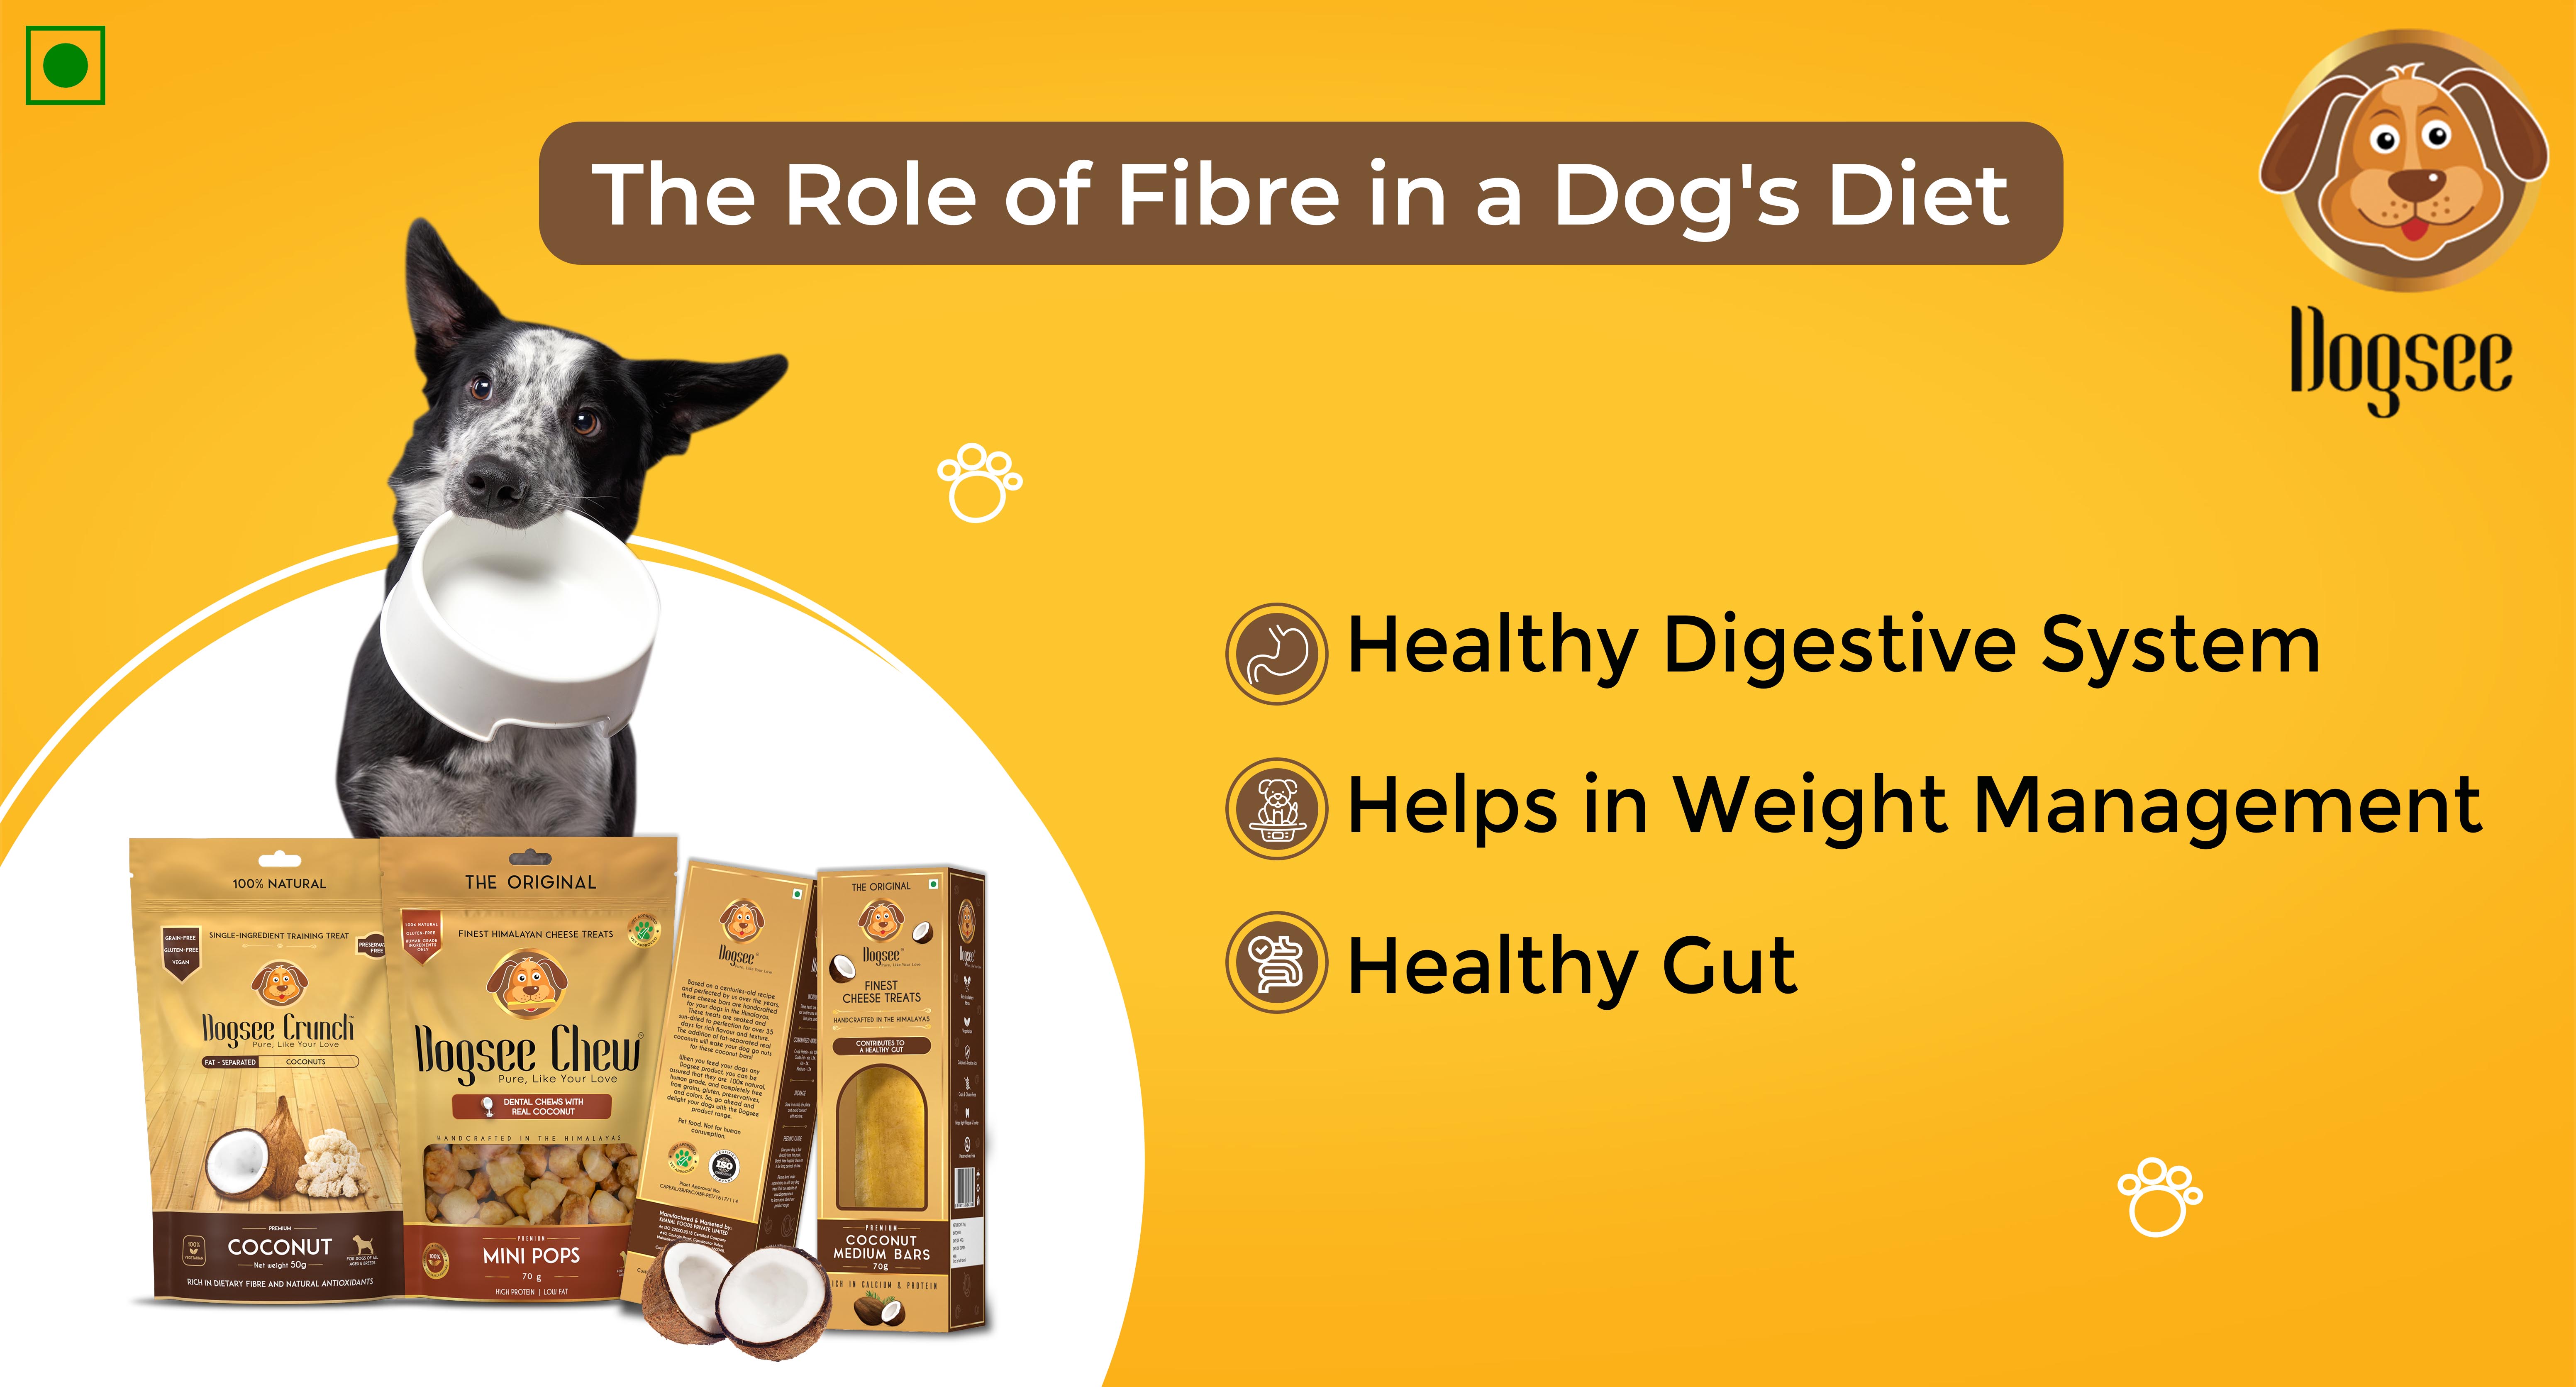 The Role of Fibre in a Dog's Diet